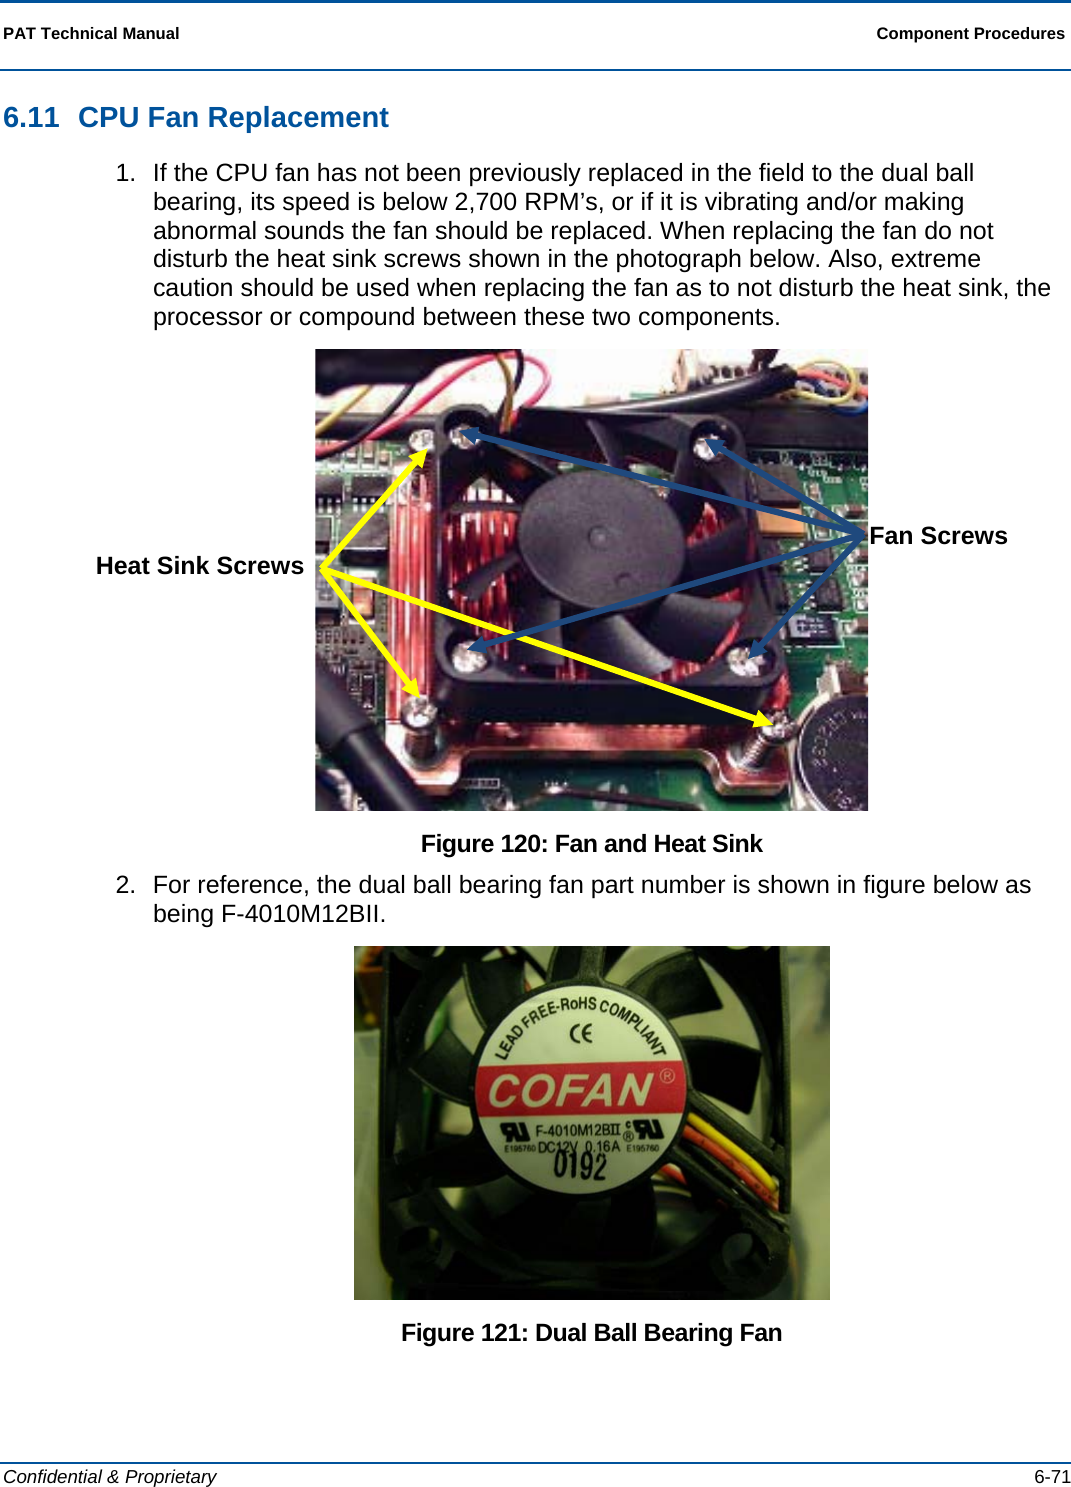  PAT Technical Manual  Component Procedures  Confidential &amp; Proprietary   6-71 6.11  CPU Fan Replacement 1.  If the CPU fan has not been previously replaced in the field to the dual ball bearing, its speed is below 2,700 RPM’s, or if it is vibrating and/or making abnormal sounds the fan should be replaced. When replacing the fan do not disturb the heat sink screws shown in the photograph below. Also, extreme caution should be used when replacing the fan as to not disturb the heat sink, the processor or compound between these two components.  Figure 120: Fan and Heat Sink 2.  For reference, the dual ball bearing fan part number is shown in figure below as being F-4010M12BII.  Figure 121: Dual Ball Bearing Fan Heat Sink Screws  Fan Screws 